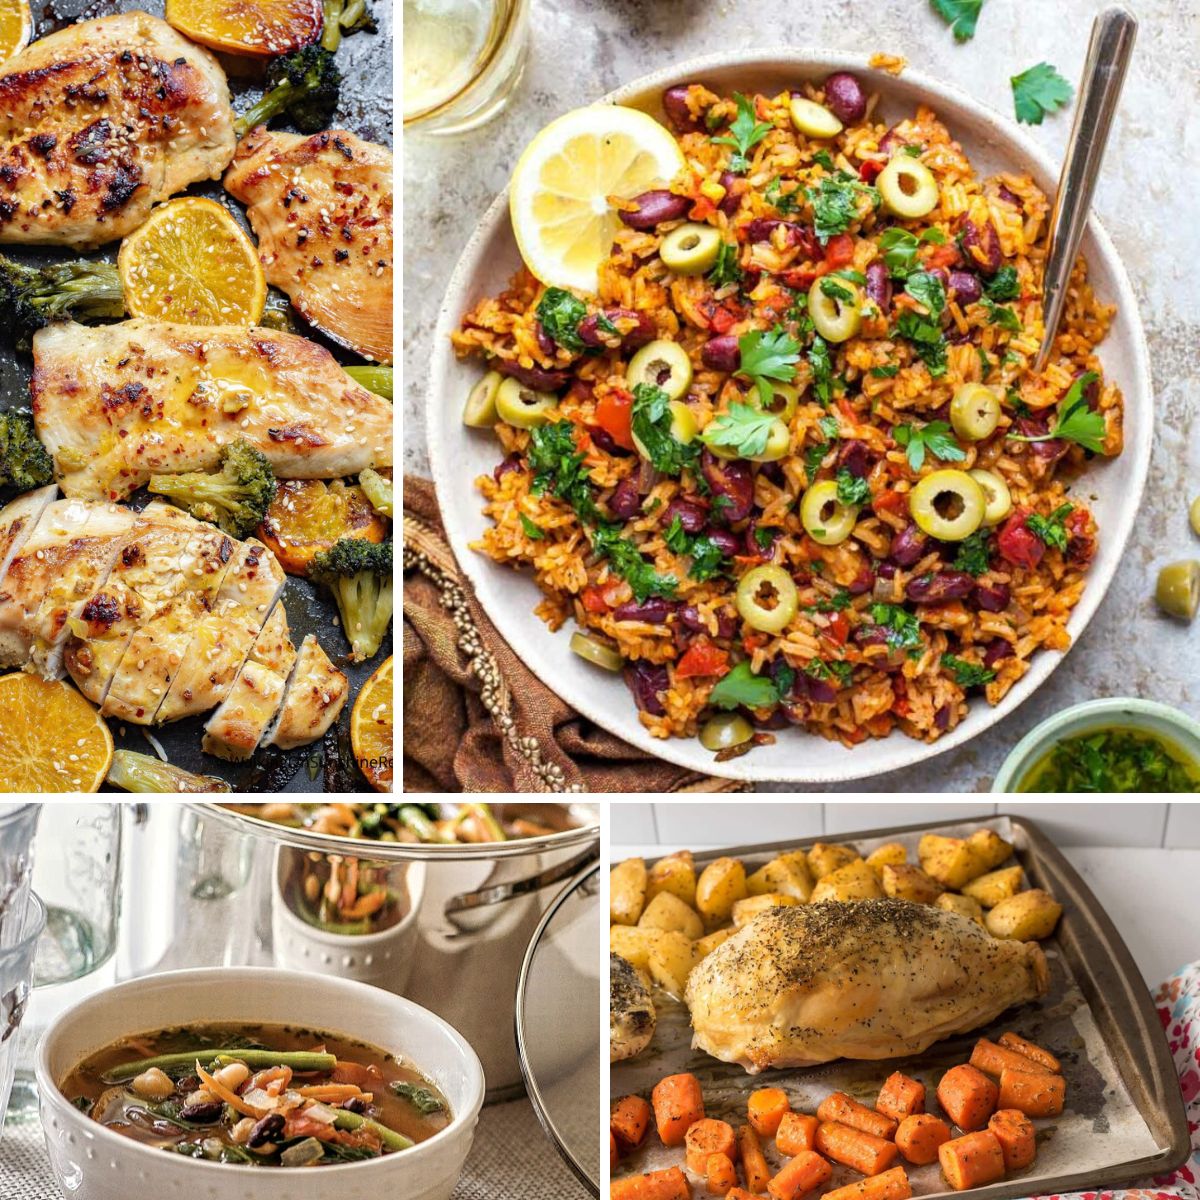 One Pot Meals Weekly Meal Plan | Walking on Sunshine Recipes